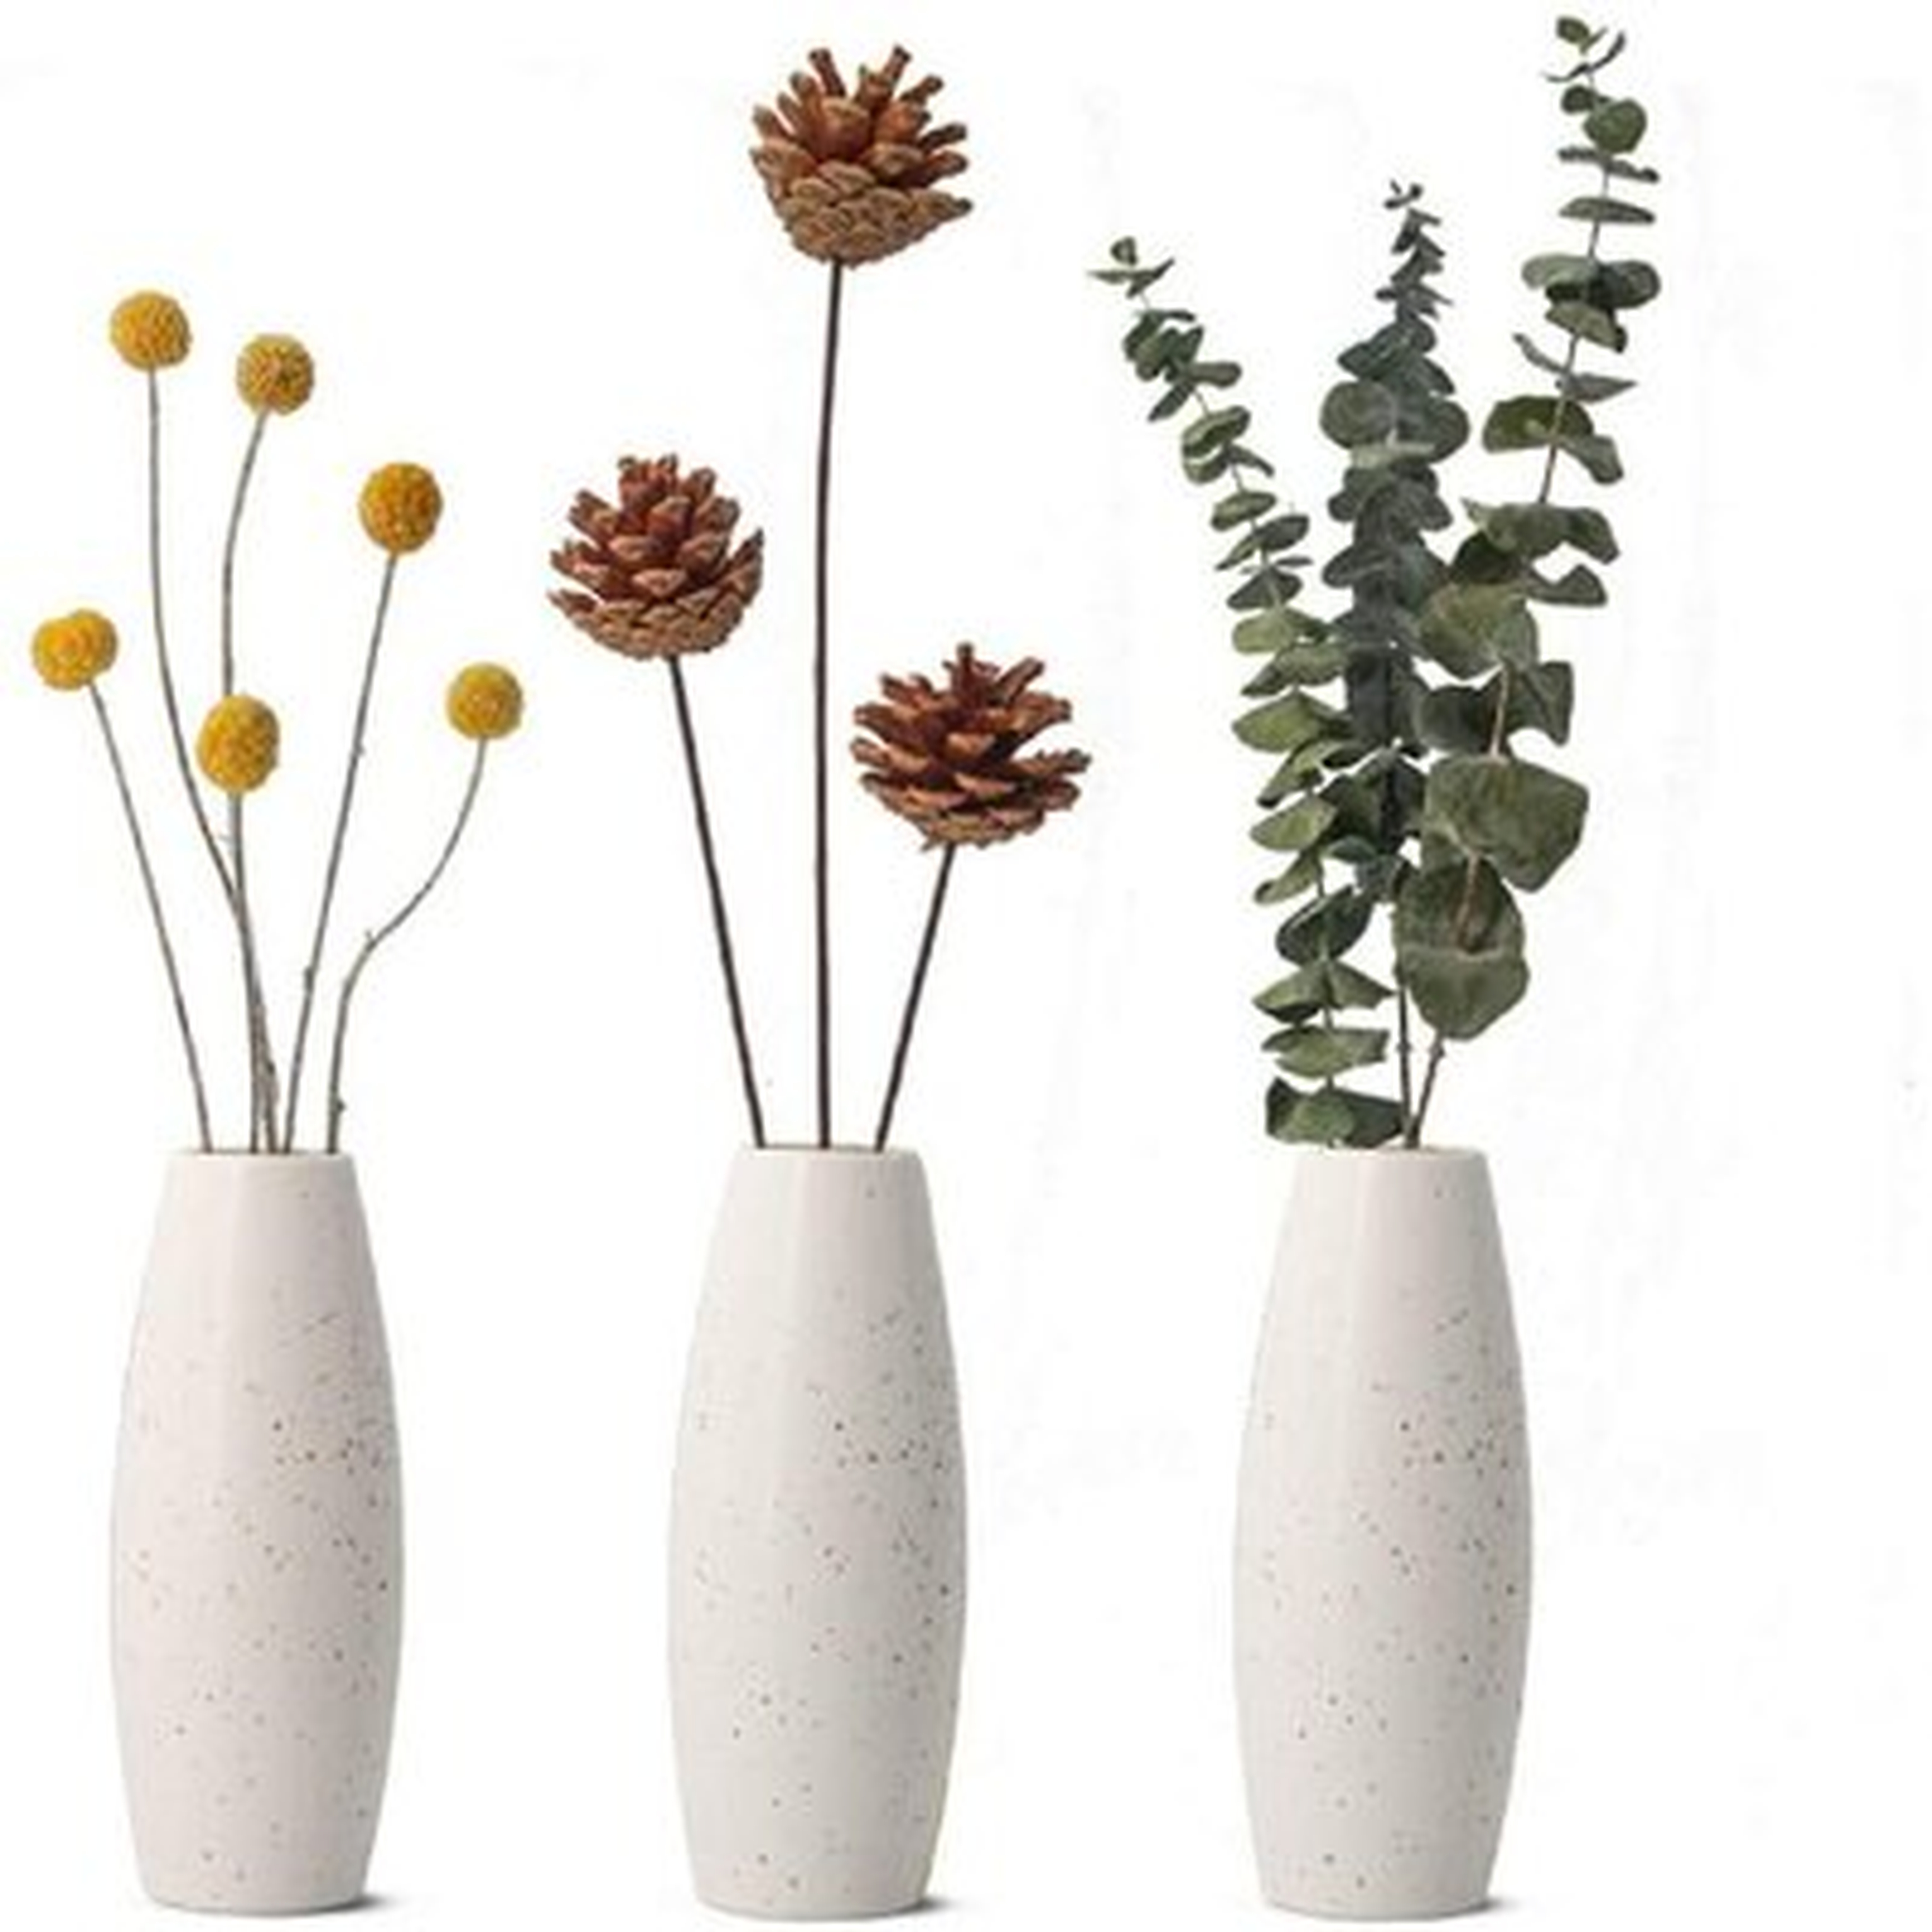 Ceramic Flower Vase Hydroponics Container Minimalist Modern Home Style Decoration Matte Design Ideal Gift For Friend Family Small Vase - Wayfair